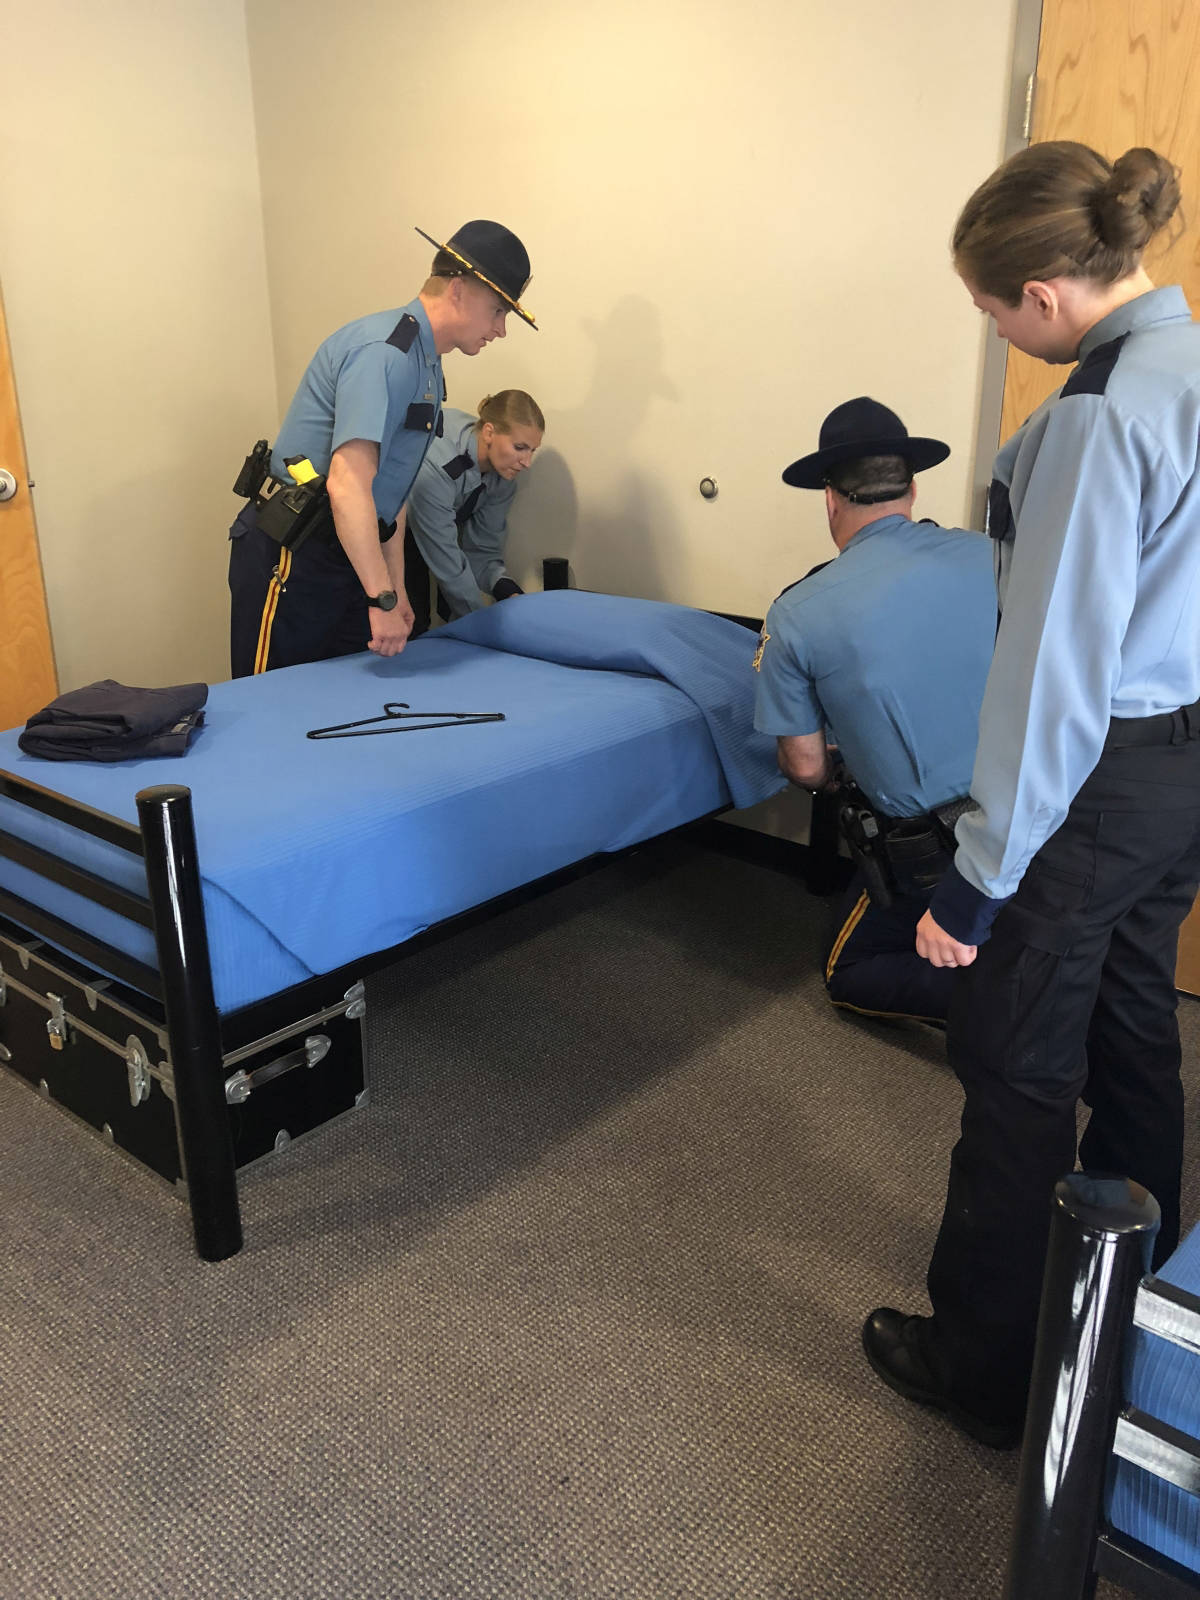 Alaska Law Enforcement Training Academy recruits are taught how to properly make the bed in their living quarters on July 30, 2018, the first day of training at the Public Safety Training Academy in Sitka, Alaska. (Alaska State Troopers photo)